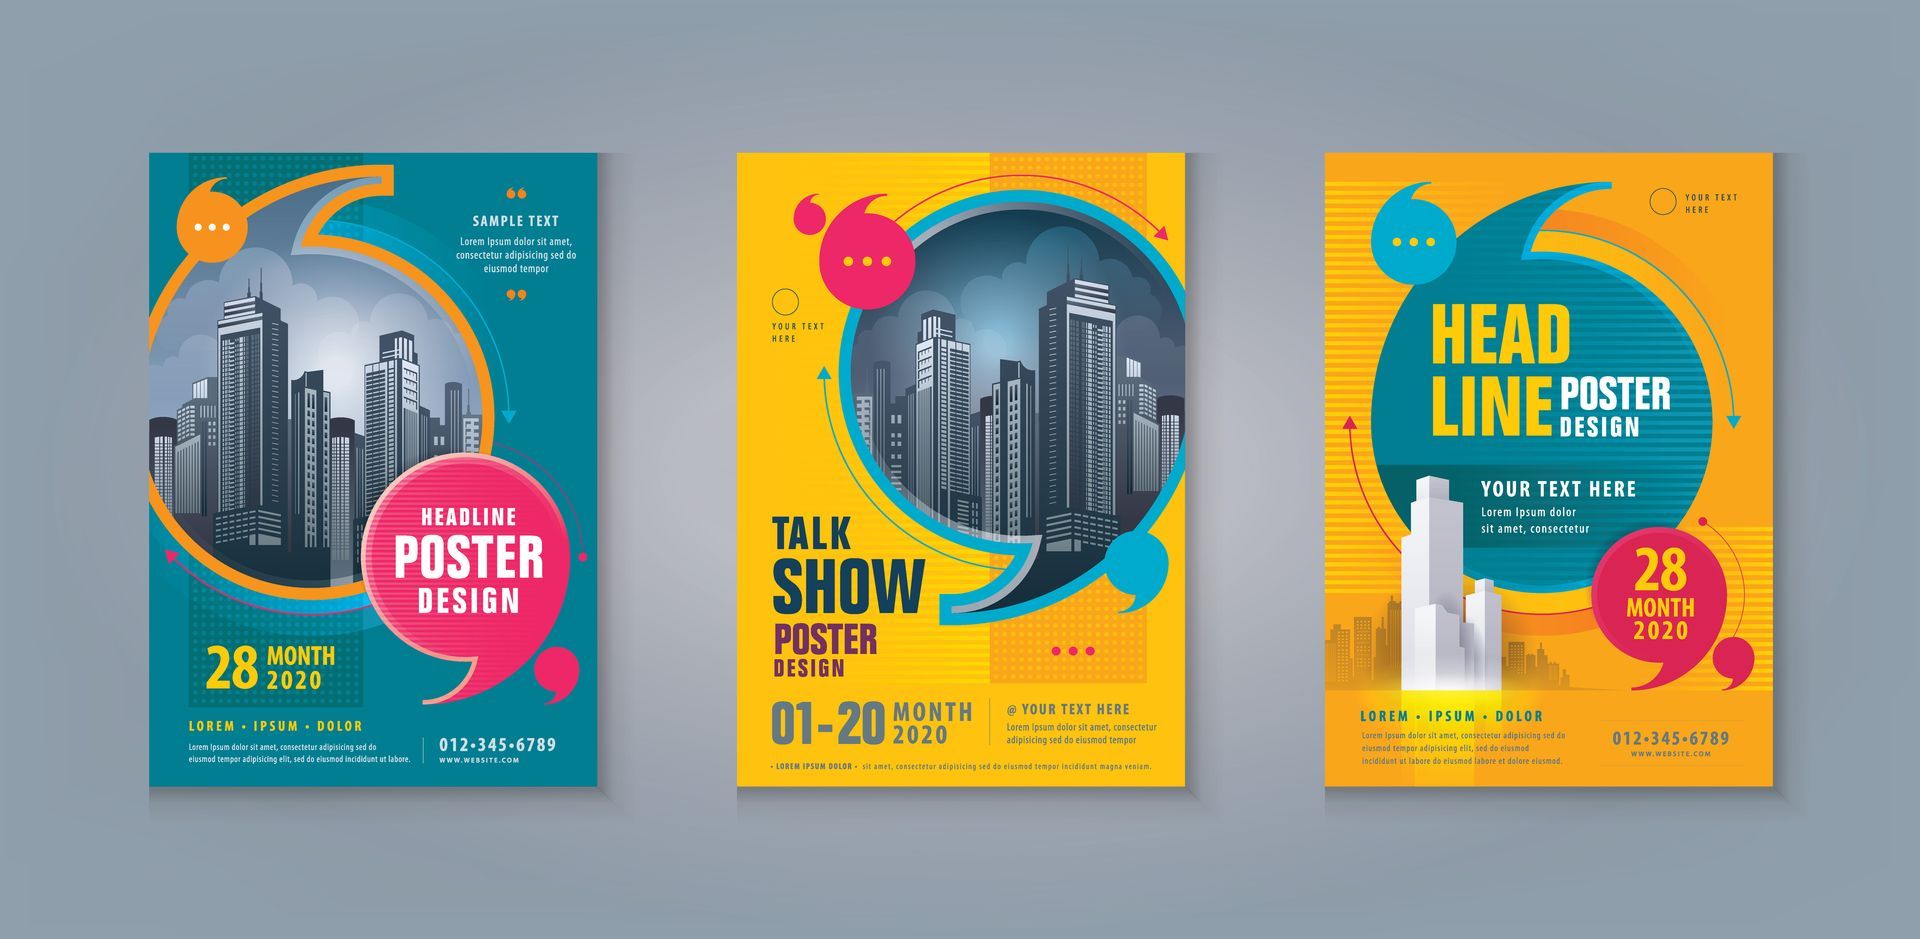 Huntington Beach Custom Posters For Conferences & Trade Shows